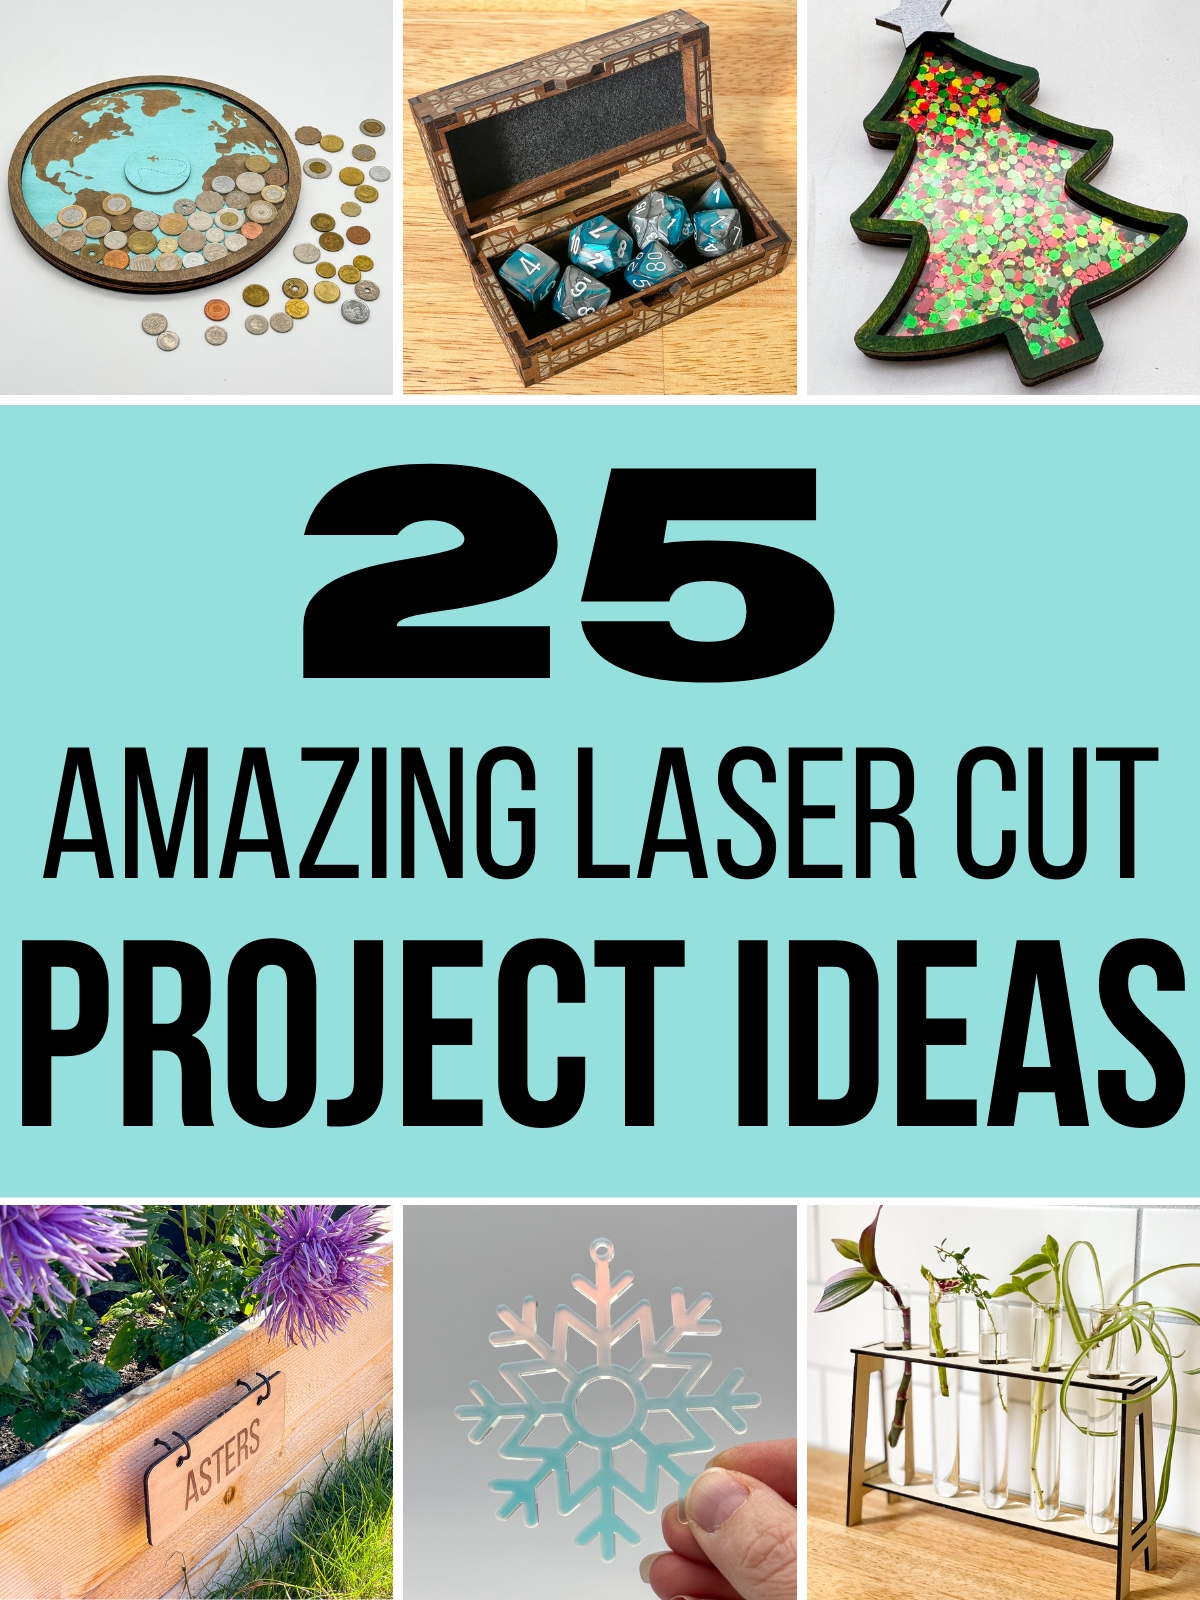 25 Amazing Laser Cut Project Ideas collage